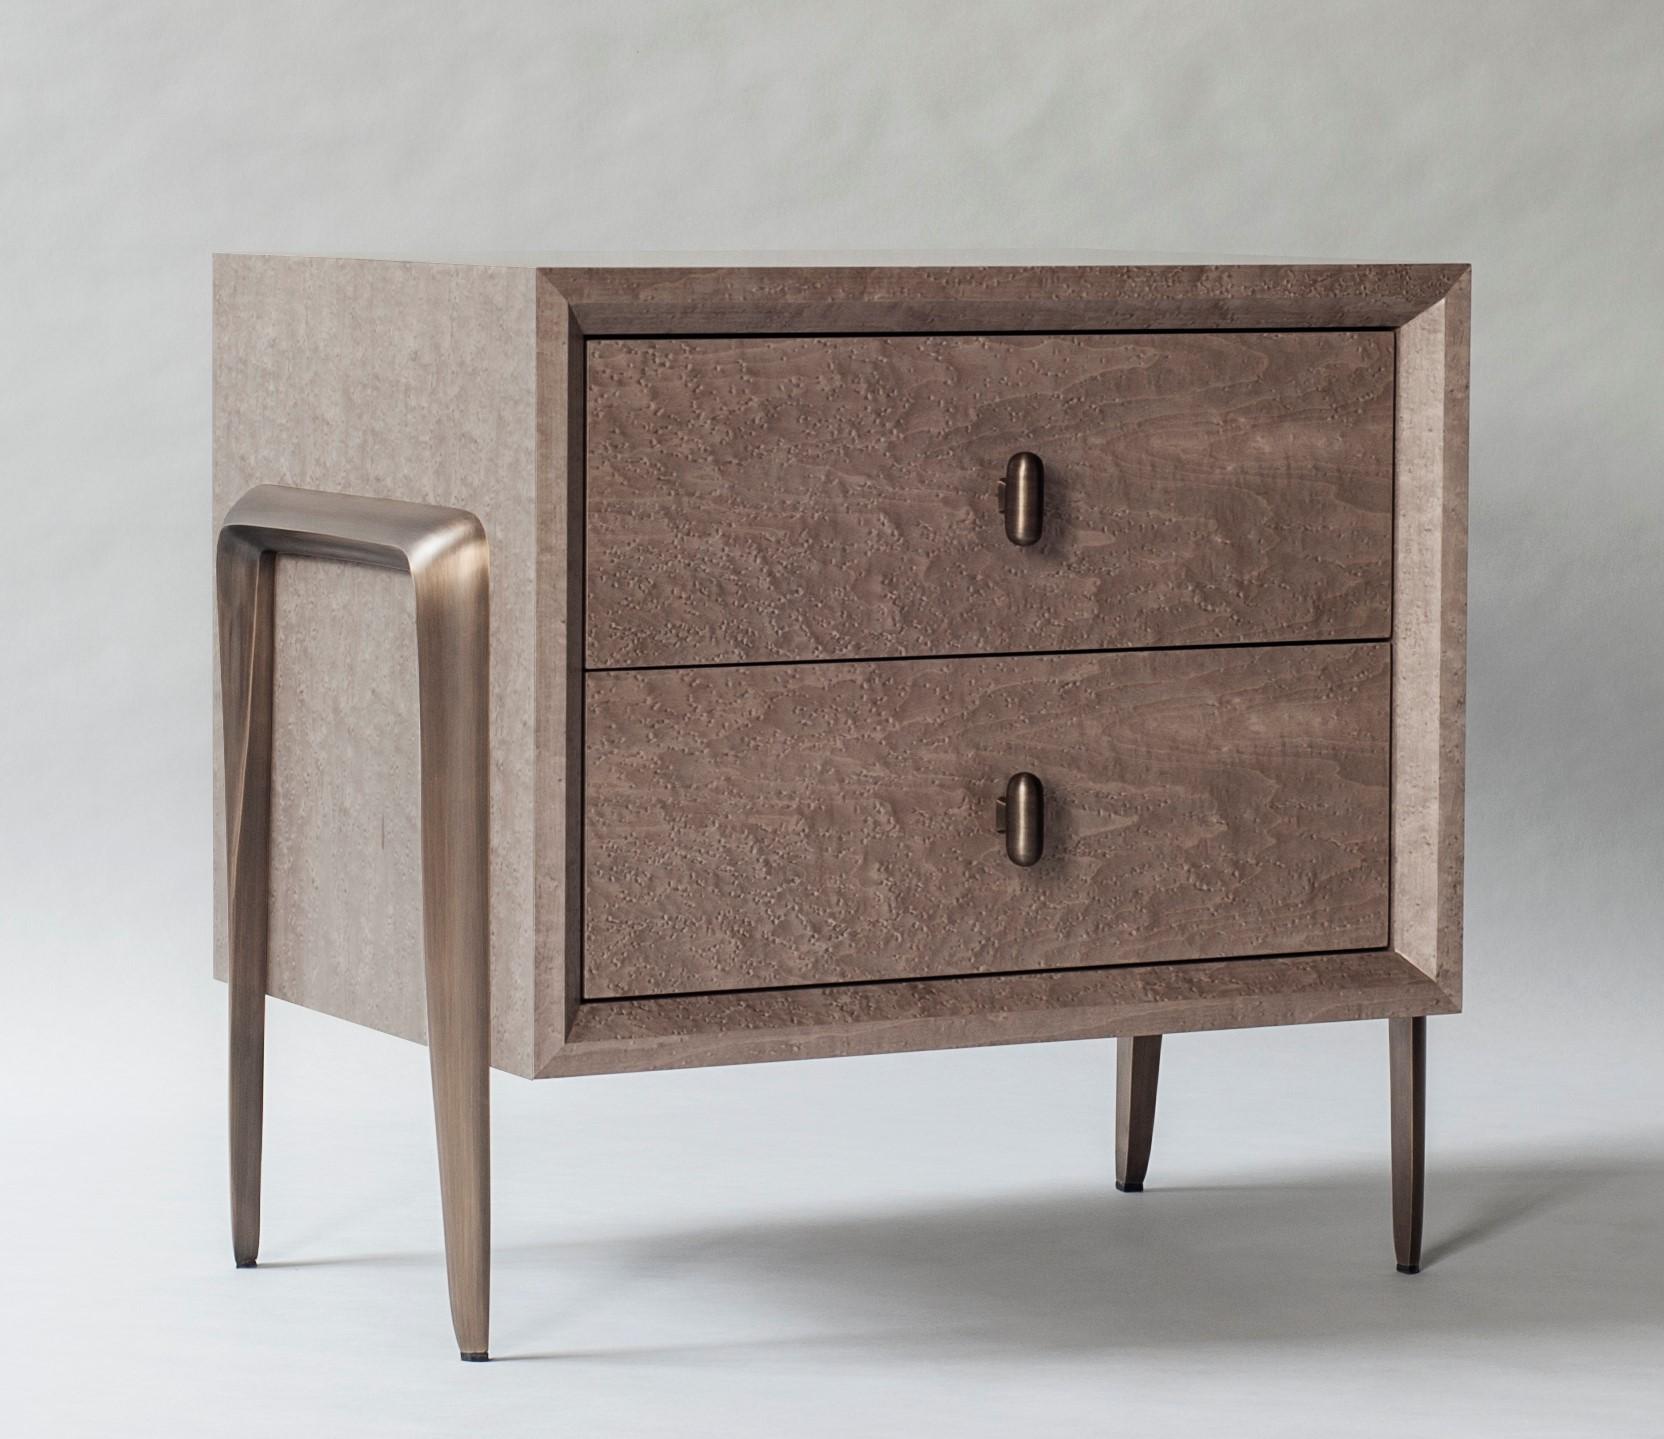 Serge bedside table by DeMuro Das 
Dimensions: w 67.4 x d 47.8 x h 61 cm
Materials: Birds eye maple (Clay)
 Solid bronze - Antique

Dimensions and finishes can be customized

DeMuro Das is an international design firm and the aesthetic and